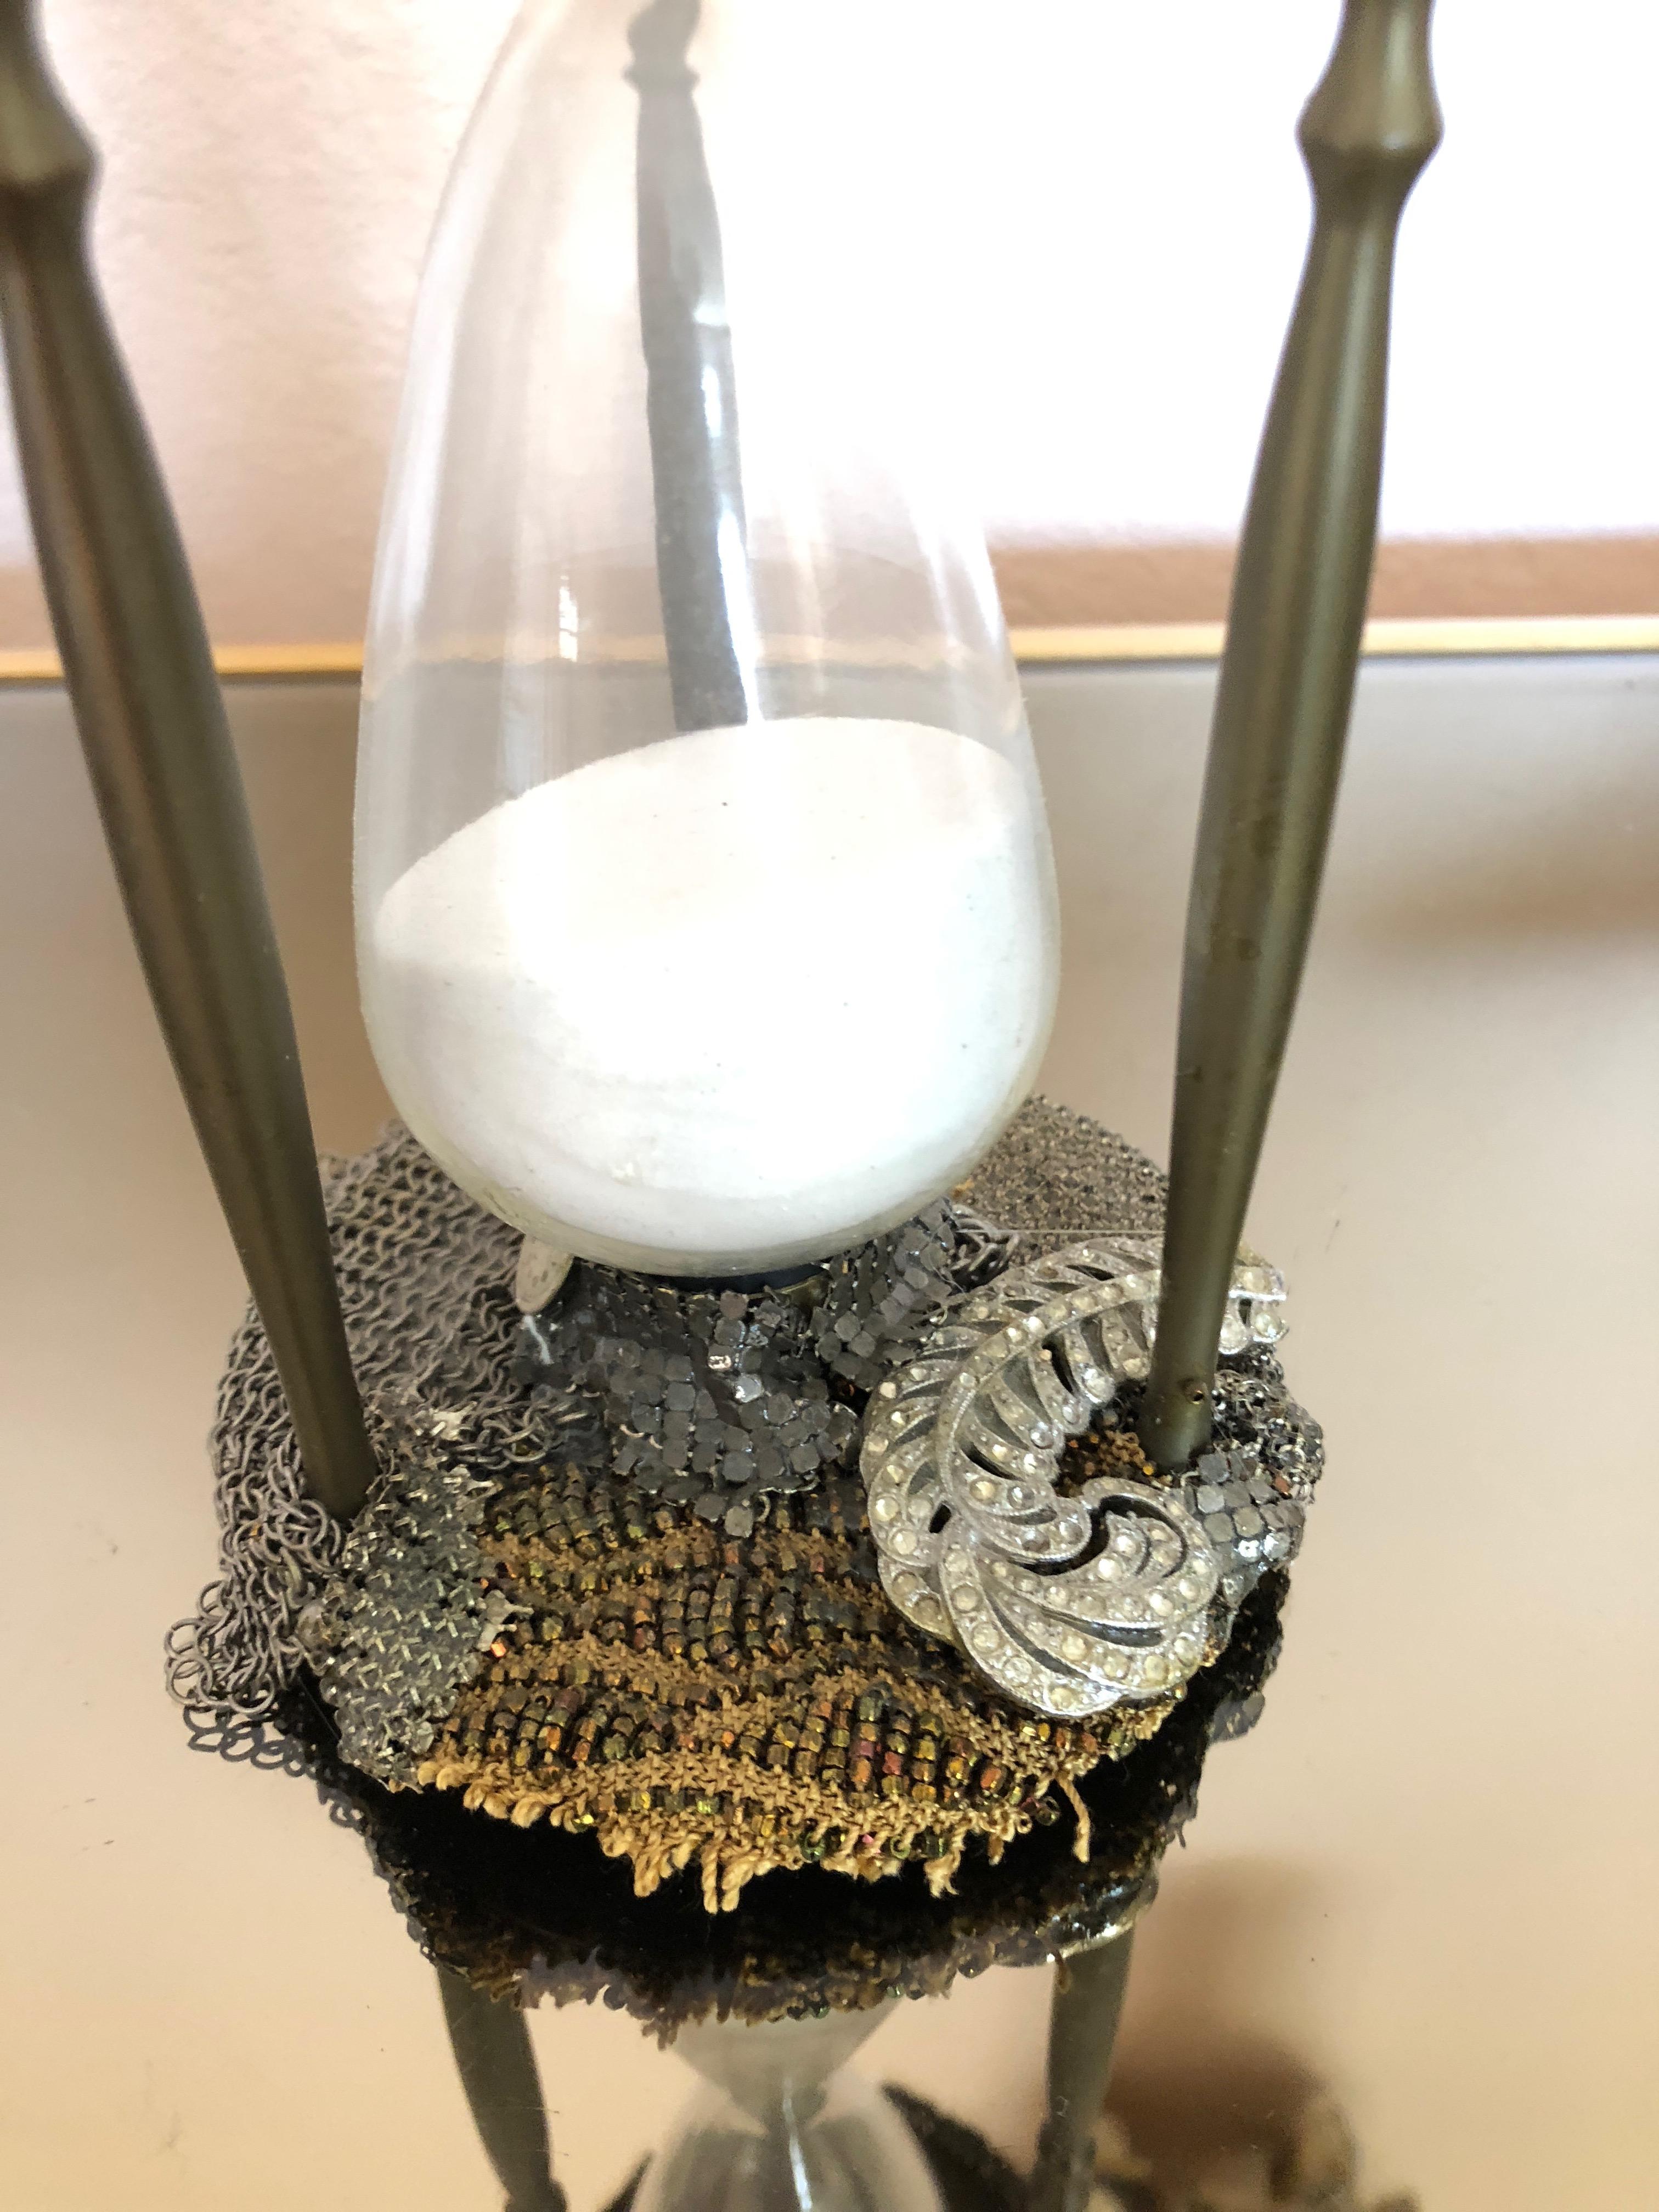 Imaginative sculpture titled The Moment having a vintage found object hourglass encrusted with bits and pieces from mesh silver and gold handbags, watch faces, ceramic skull and hot water faucet. Charming and thought provoking. Signed on bottom, Fay